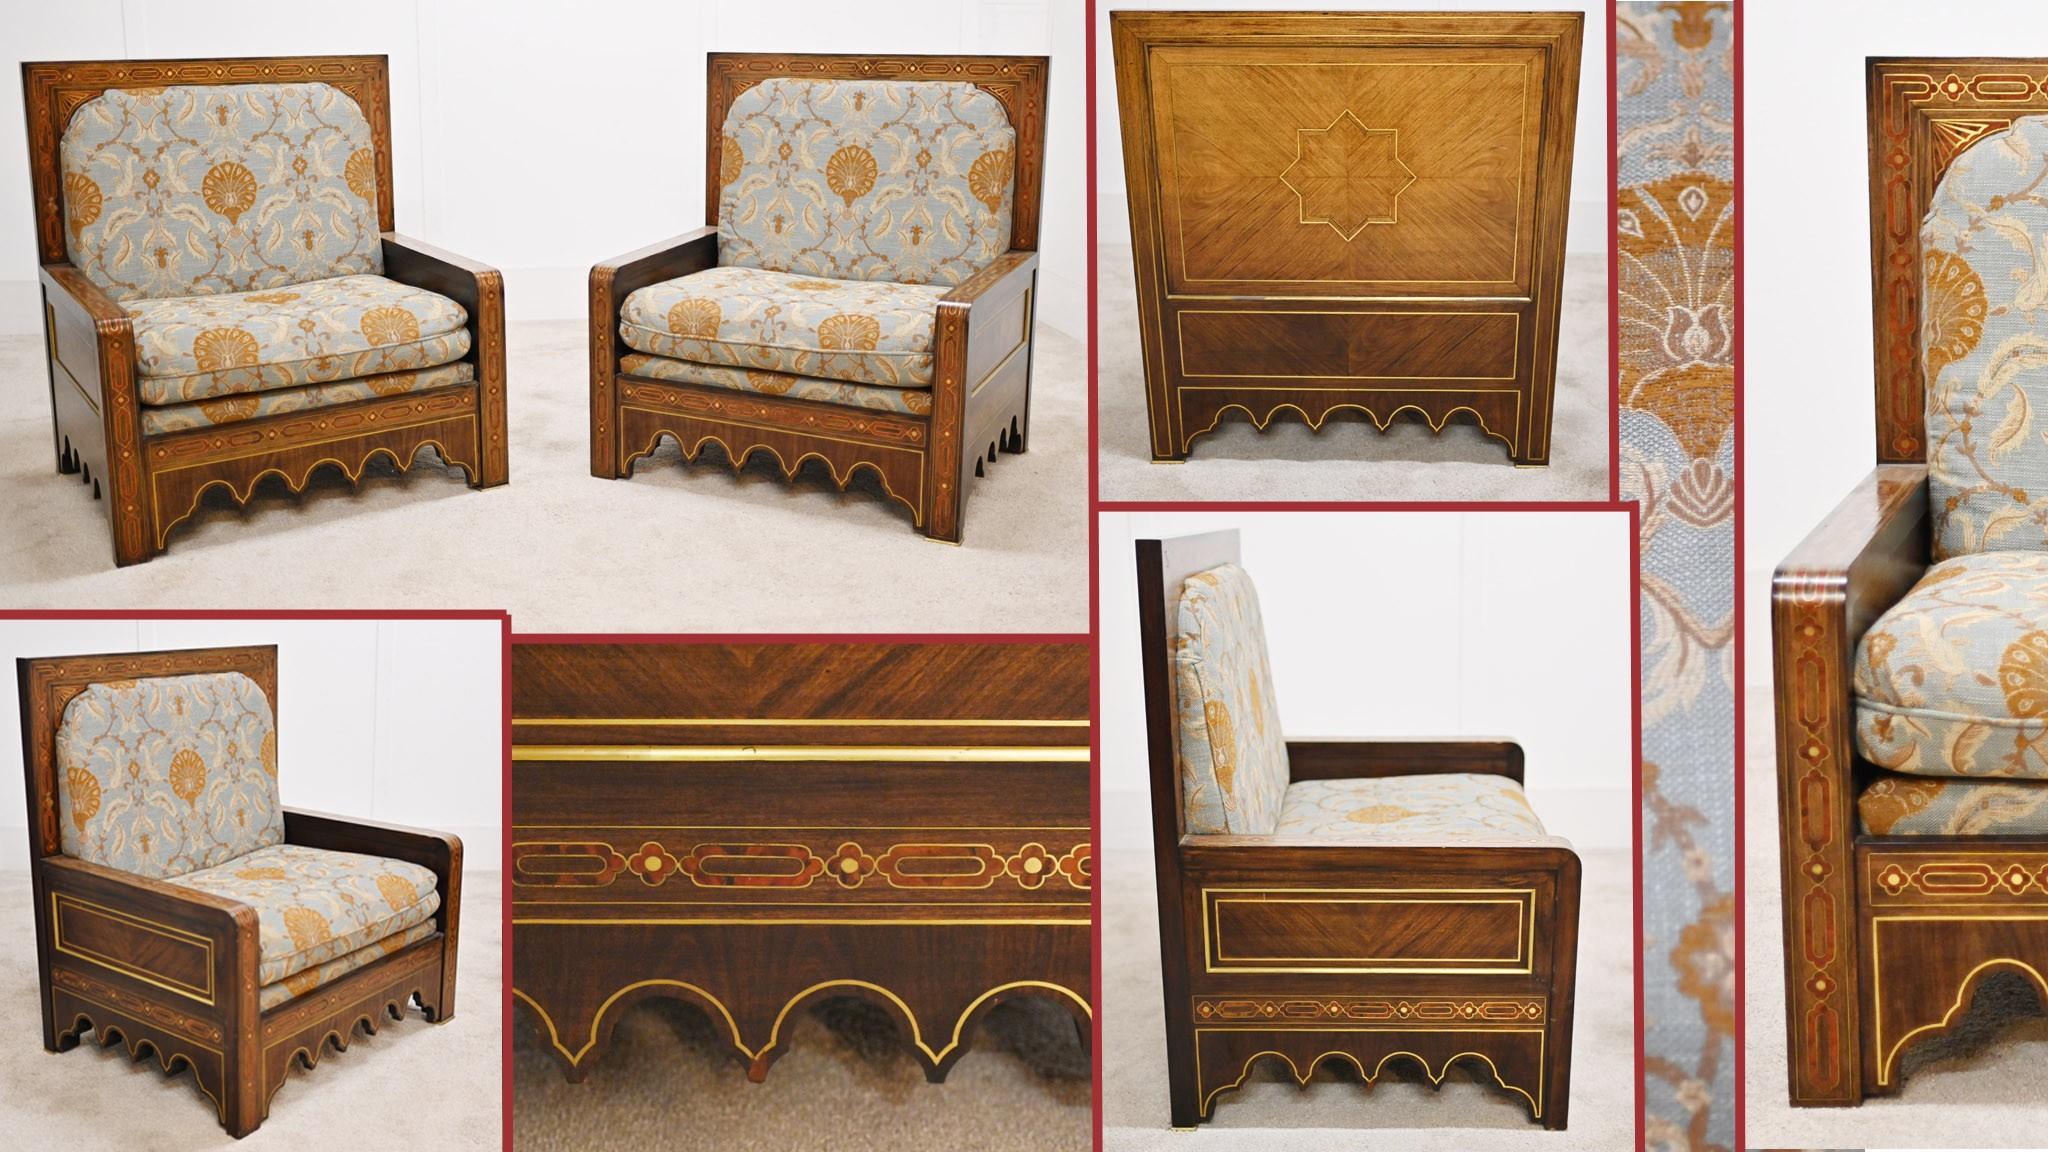 A fine pair of Middle Eastern Damascan arm chairs with brass Boulle style decorative inlays. 
Freshly upholstered in the Middle Eastern manner with a Jim Dickens floral material
Great look to these and very comfortable to sit in
Great pair for a